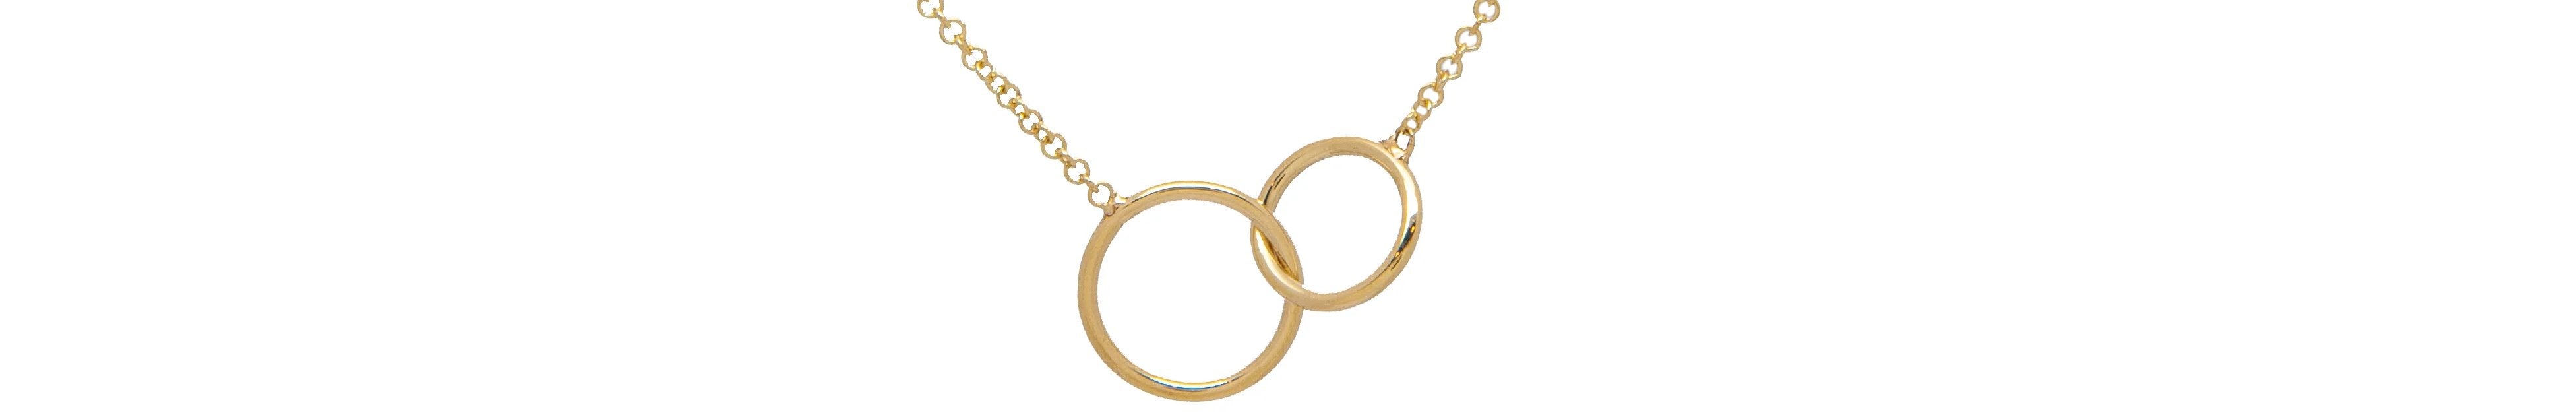 14K GOLD COVETED CONNECTIONS LINKED RING NECKLACE